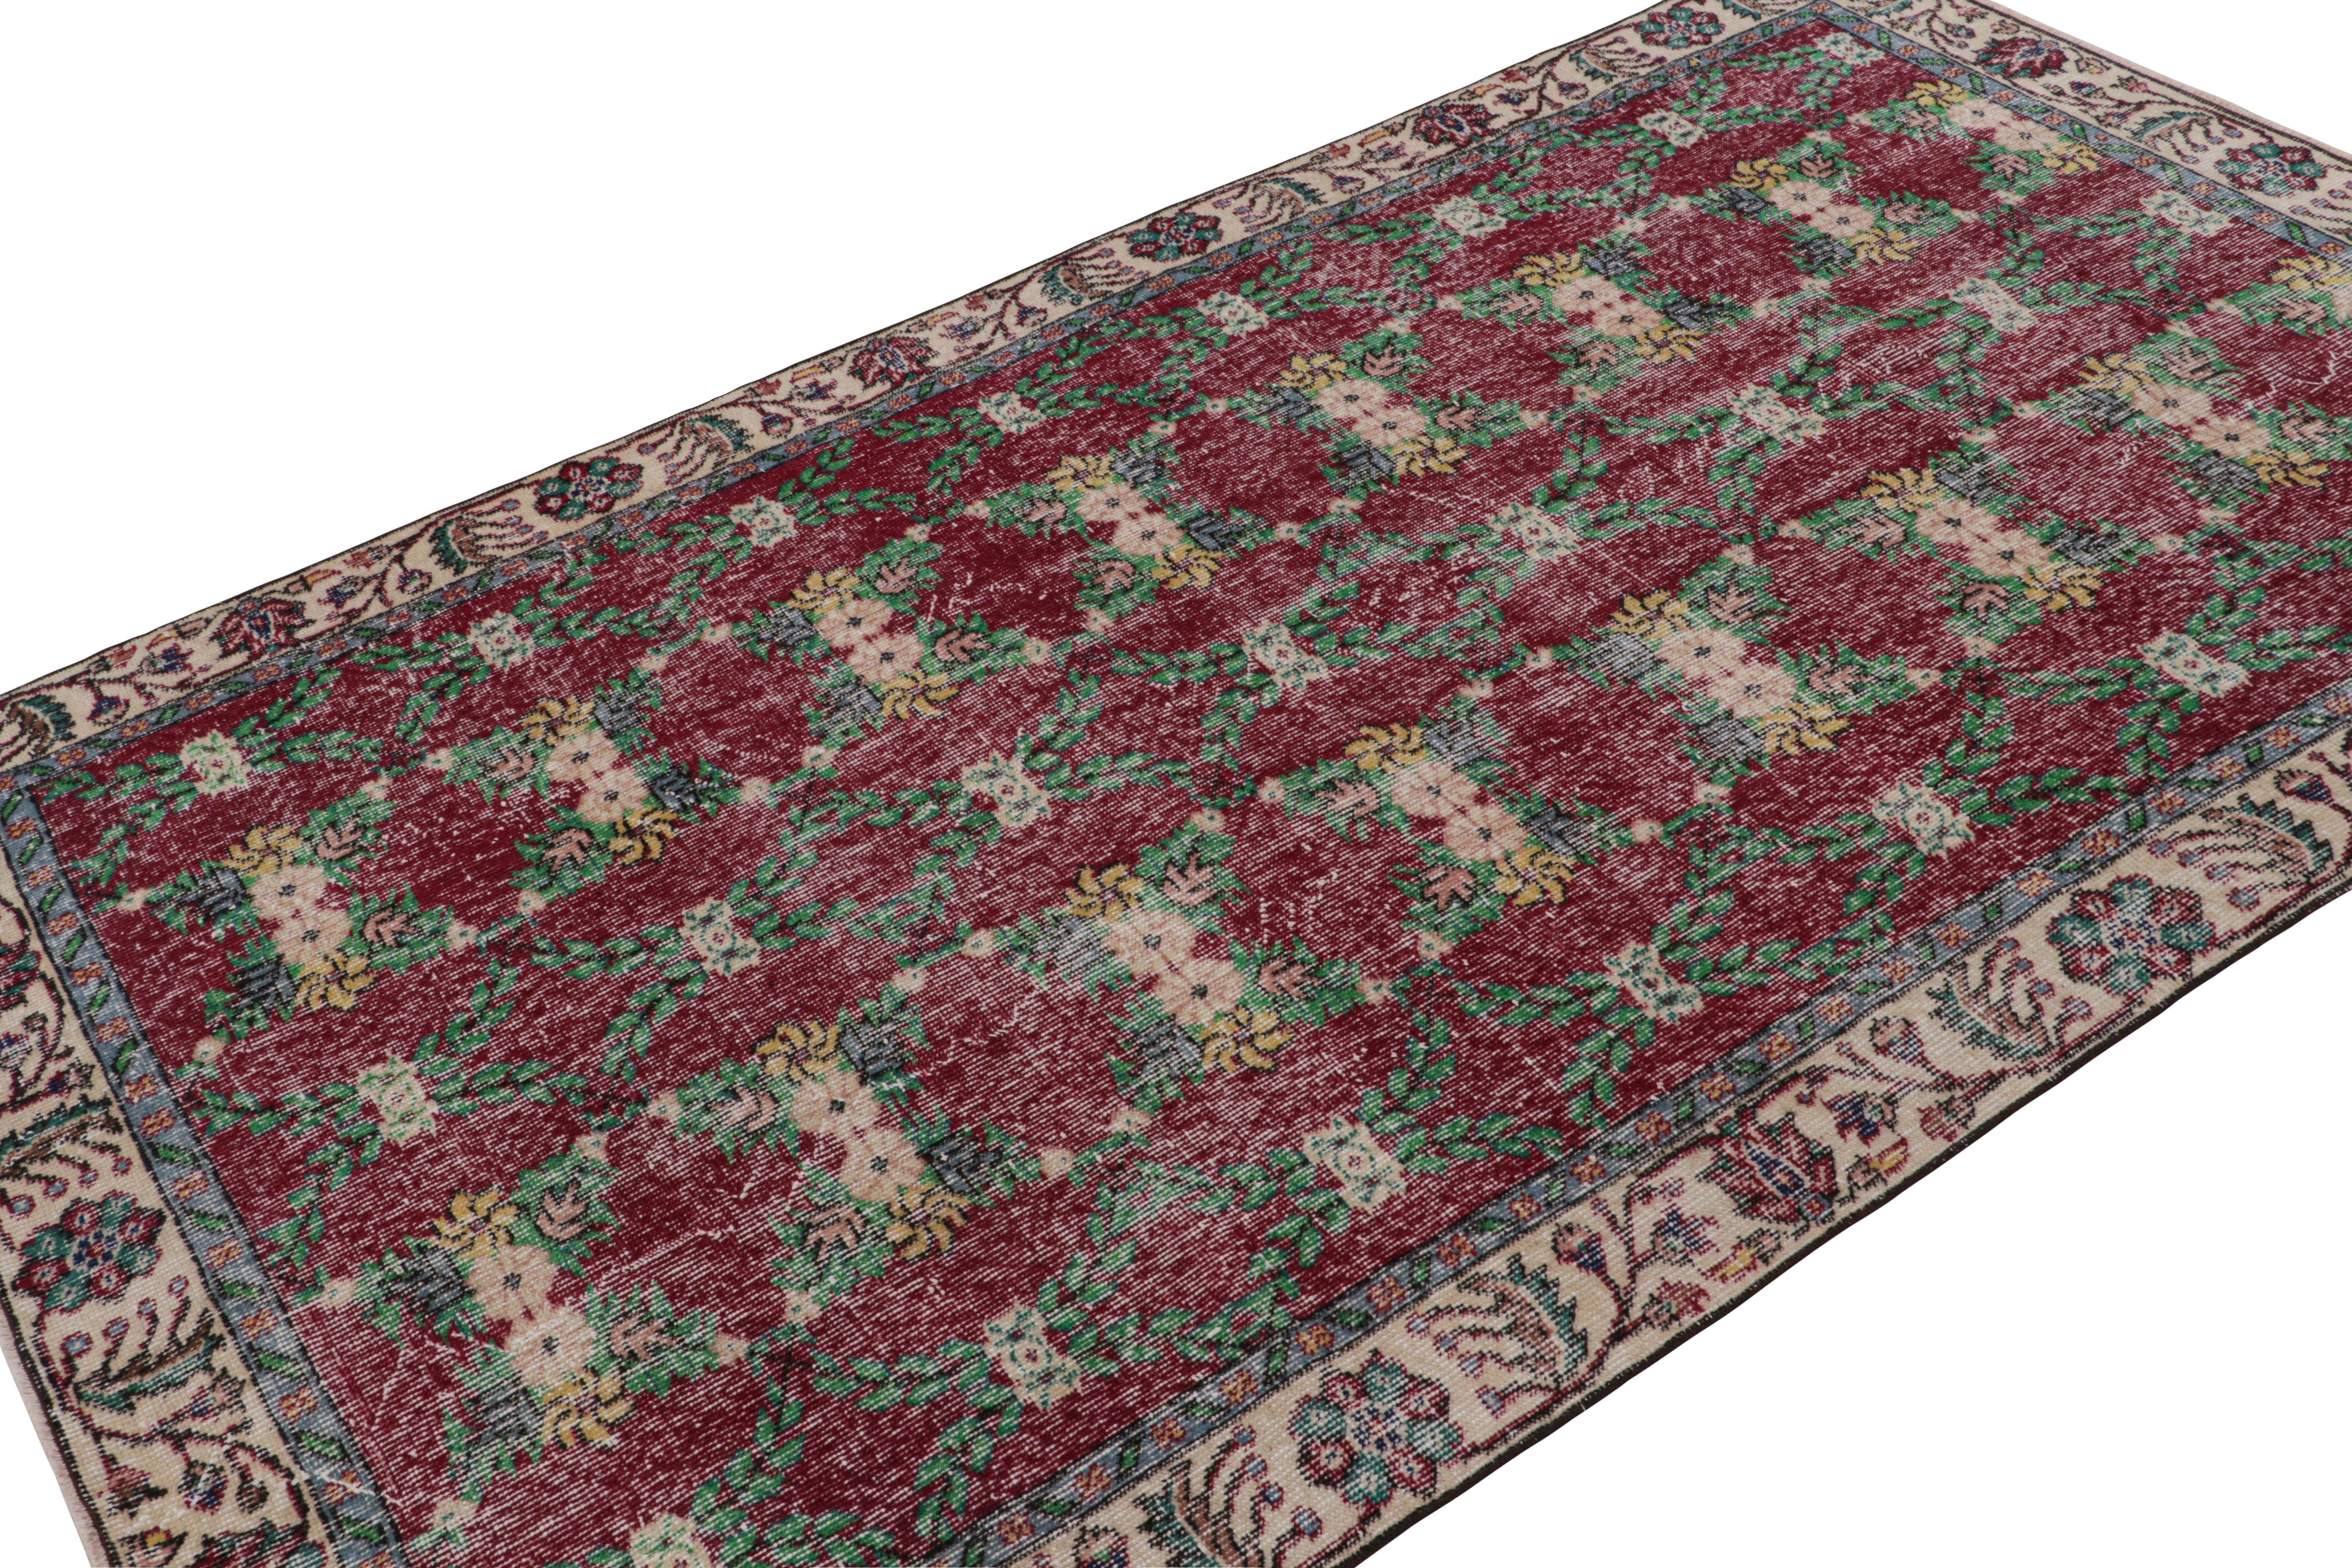 Handknotted in wool, this 5x8 vintage rug originates from Turkey, circa 1960-1970 and is believed to hail from the Turkish artist Zeki Muren. 

On the Design:

The rug enjoys teal green and burgundy red tones underscoring floral patterns with a